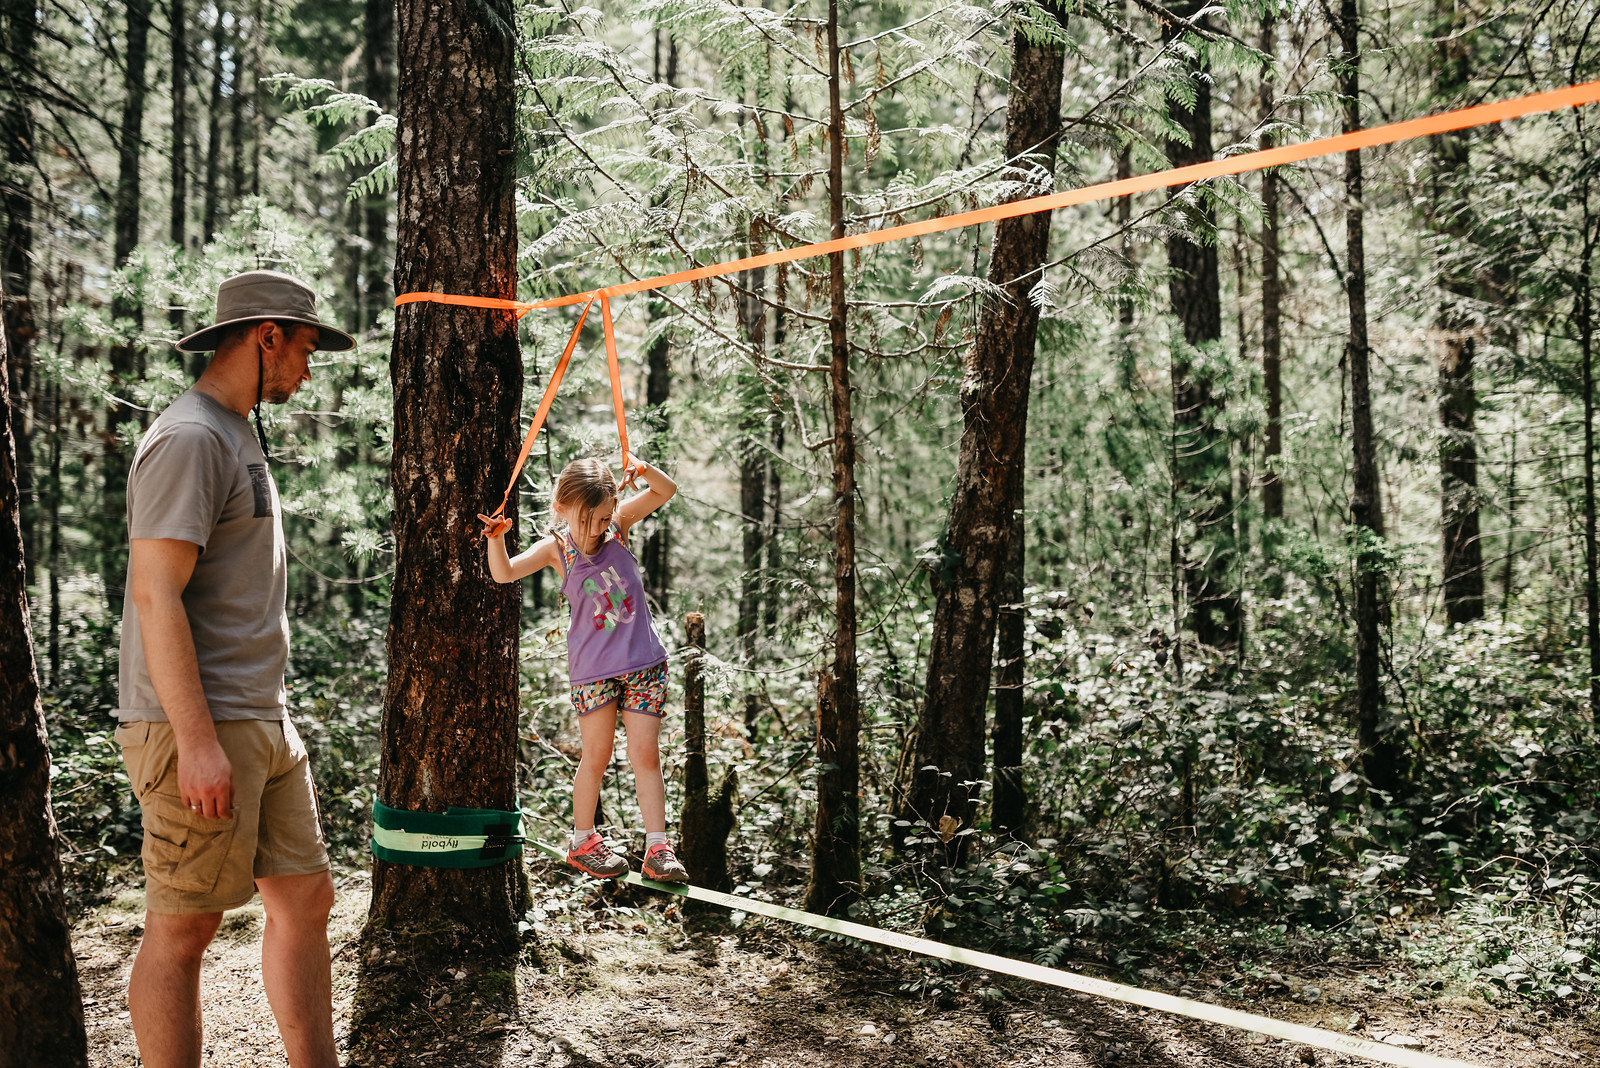 5 ways to make camping extra fun for kids by Jessica Nave for Hike it Baby